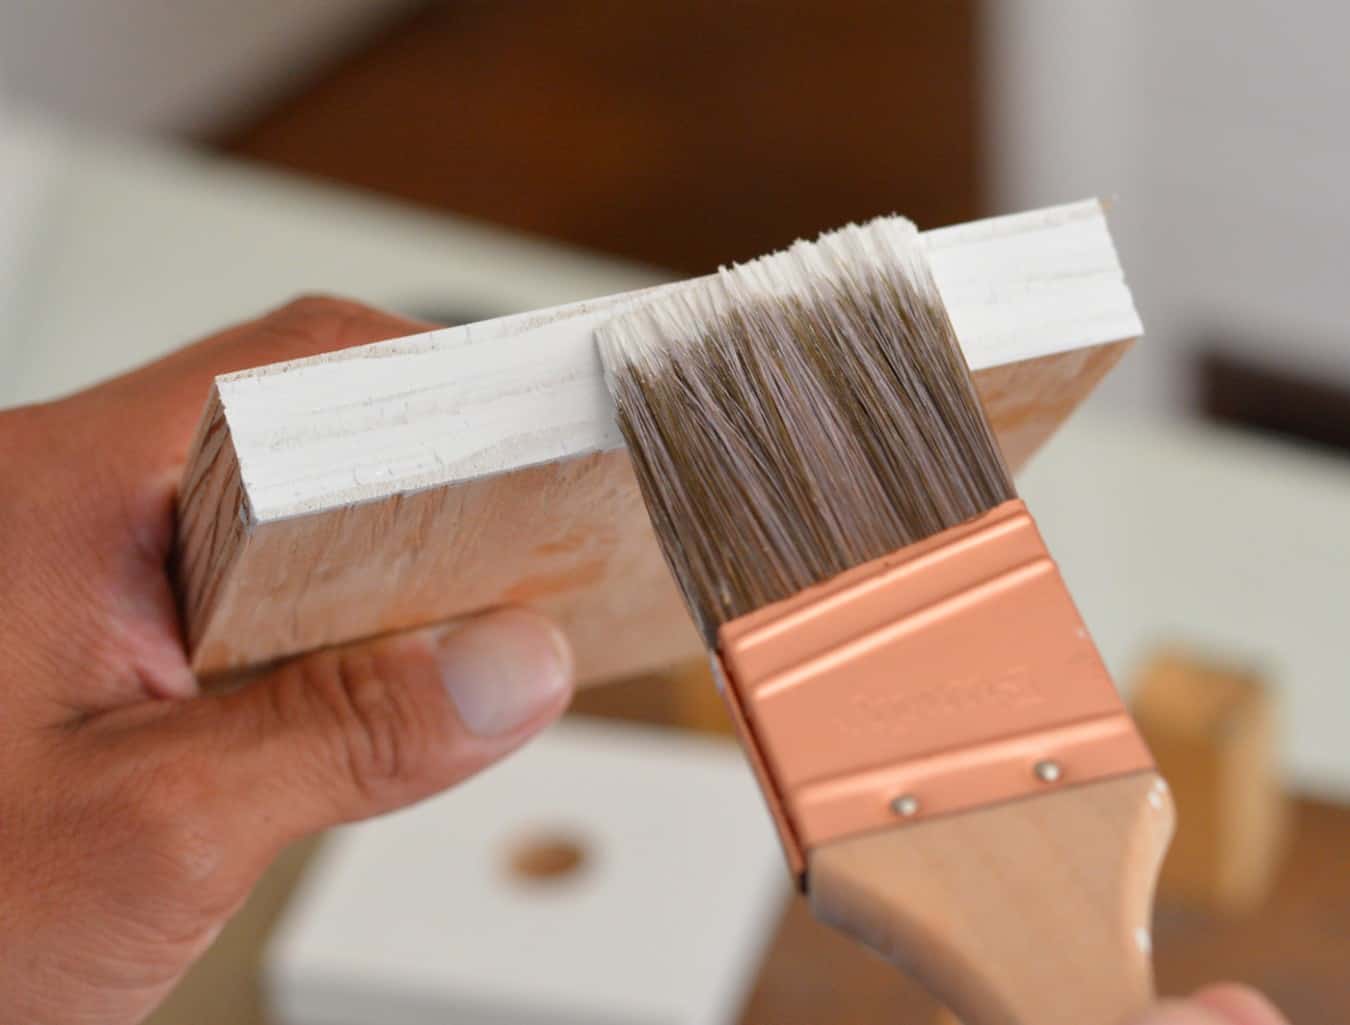 Painting the edge of a piece of wood with white paint using a paint brush